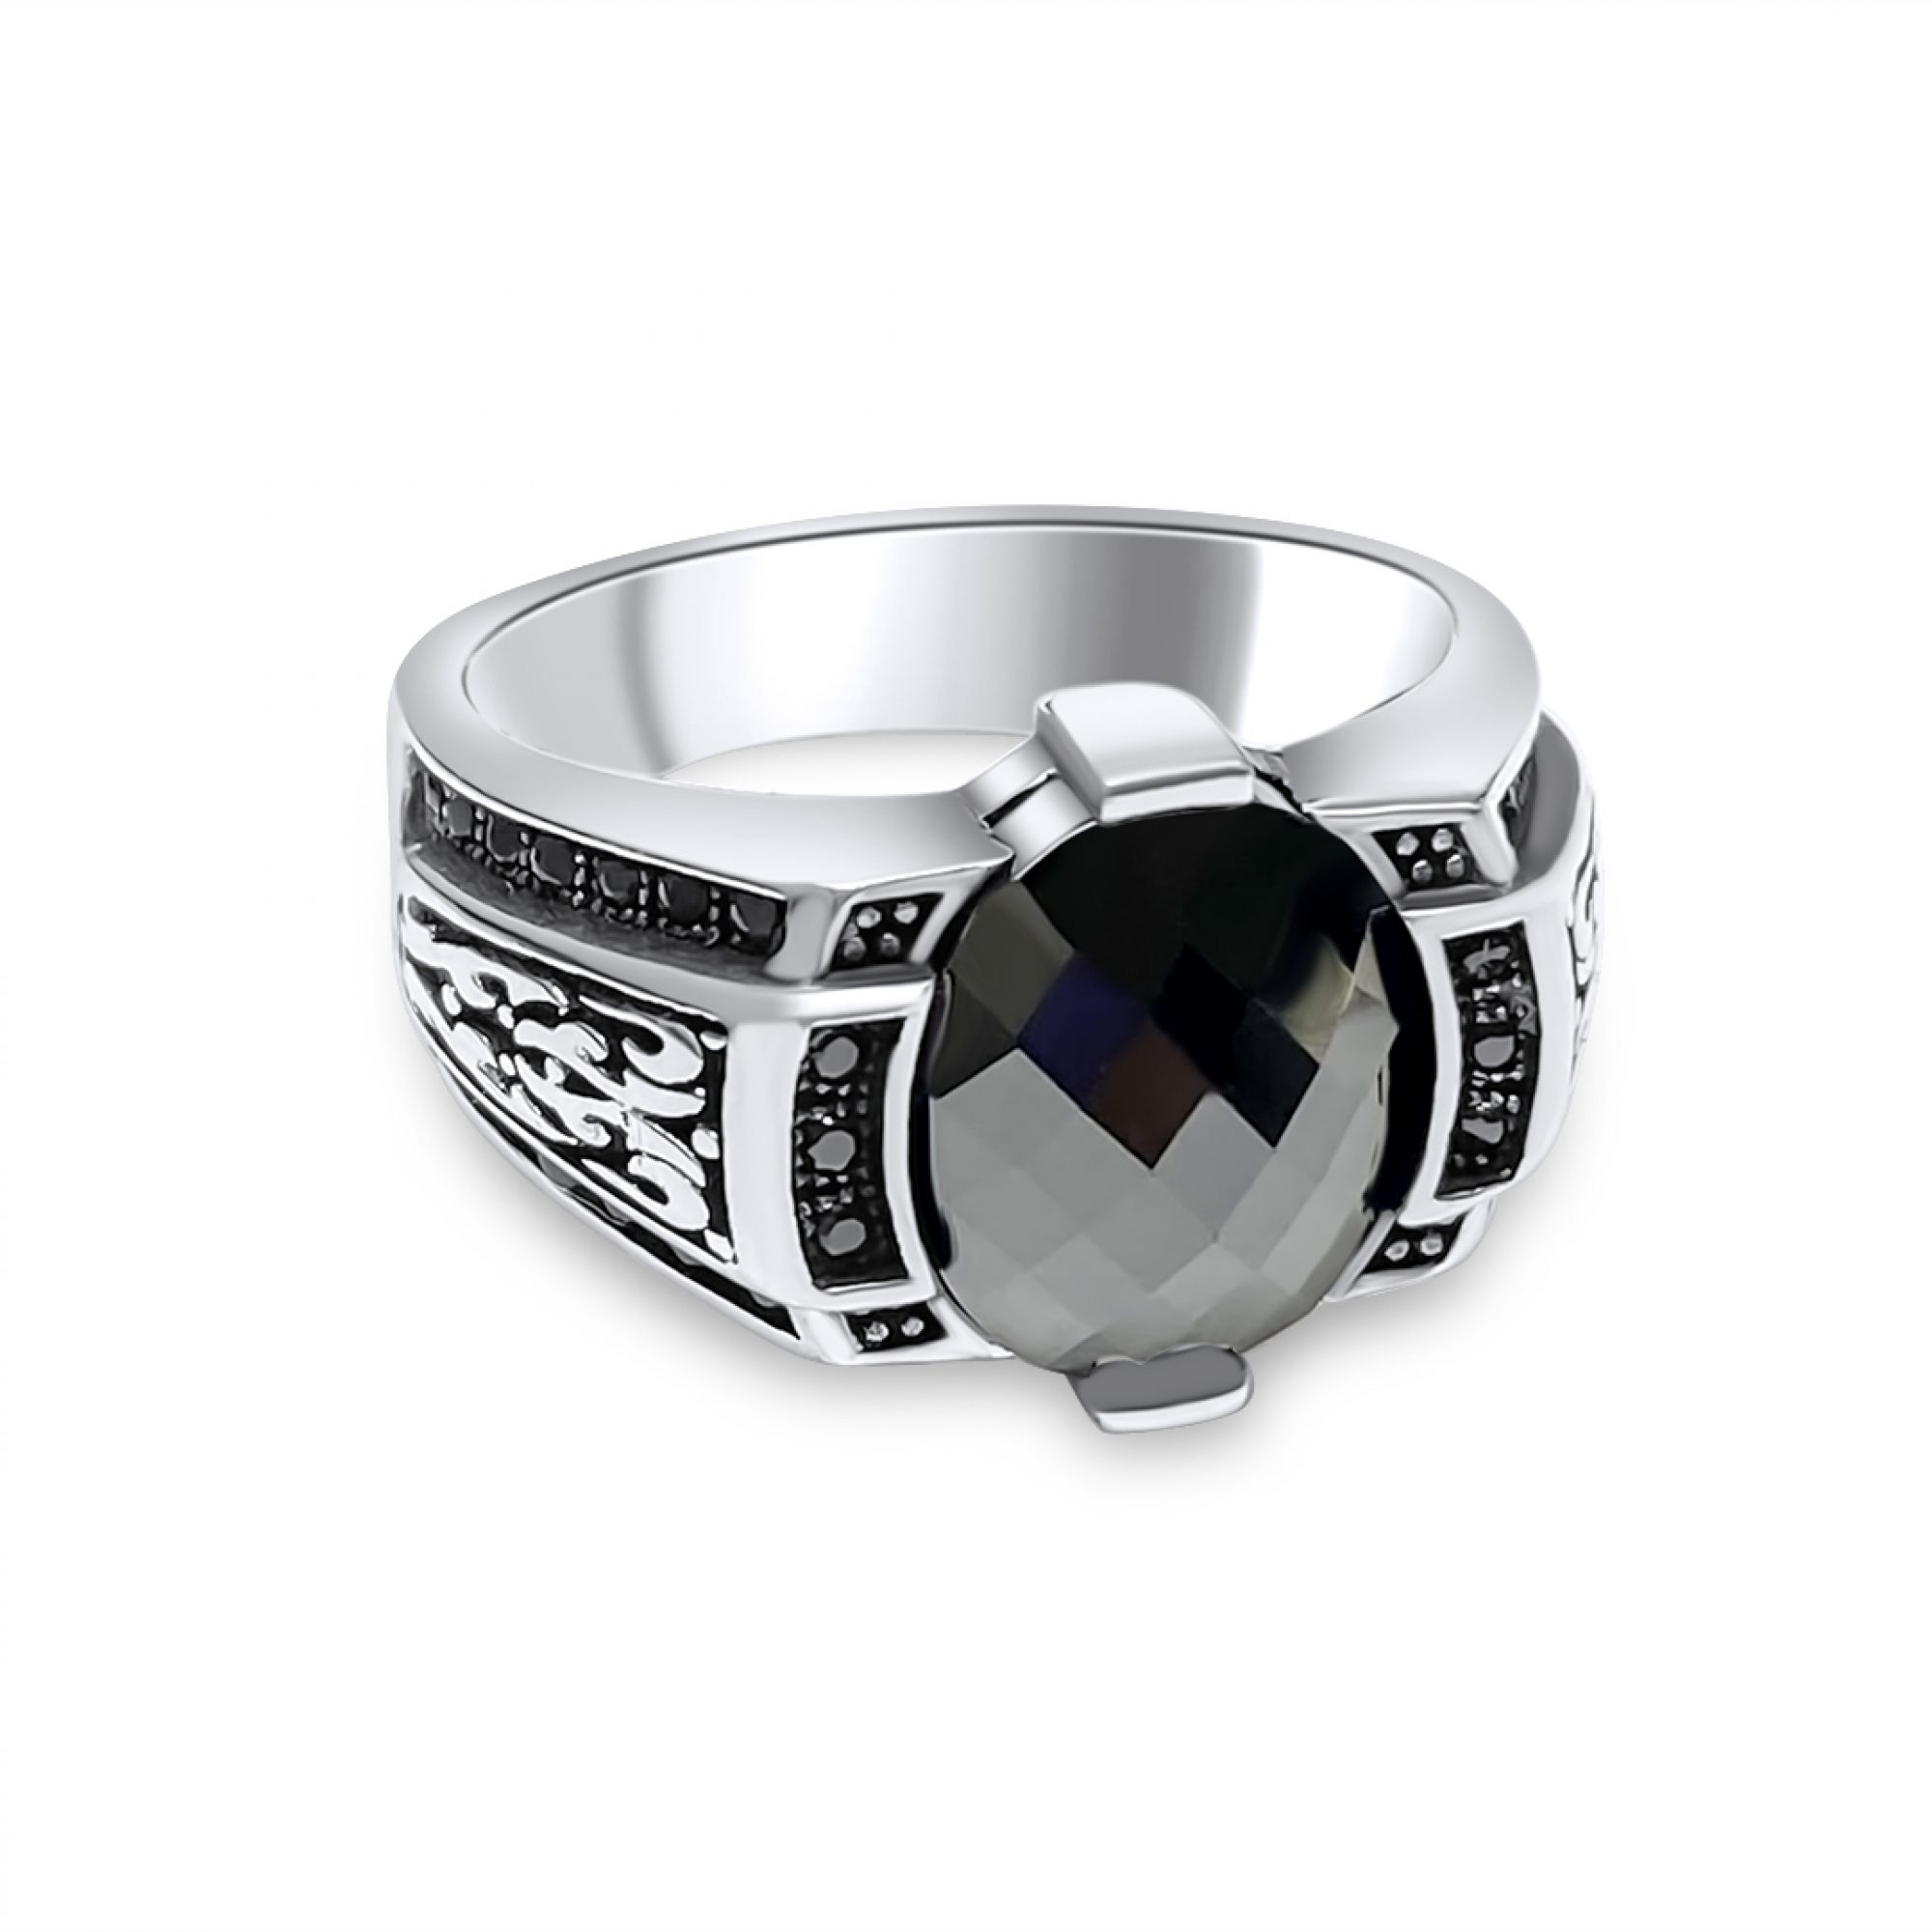 Silver ring with black zircon stone